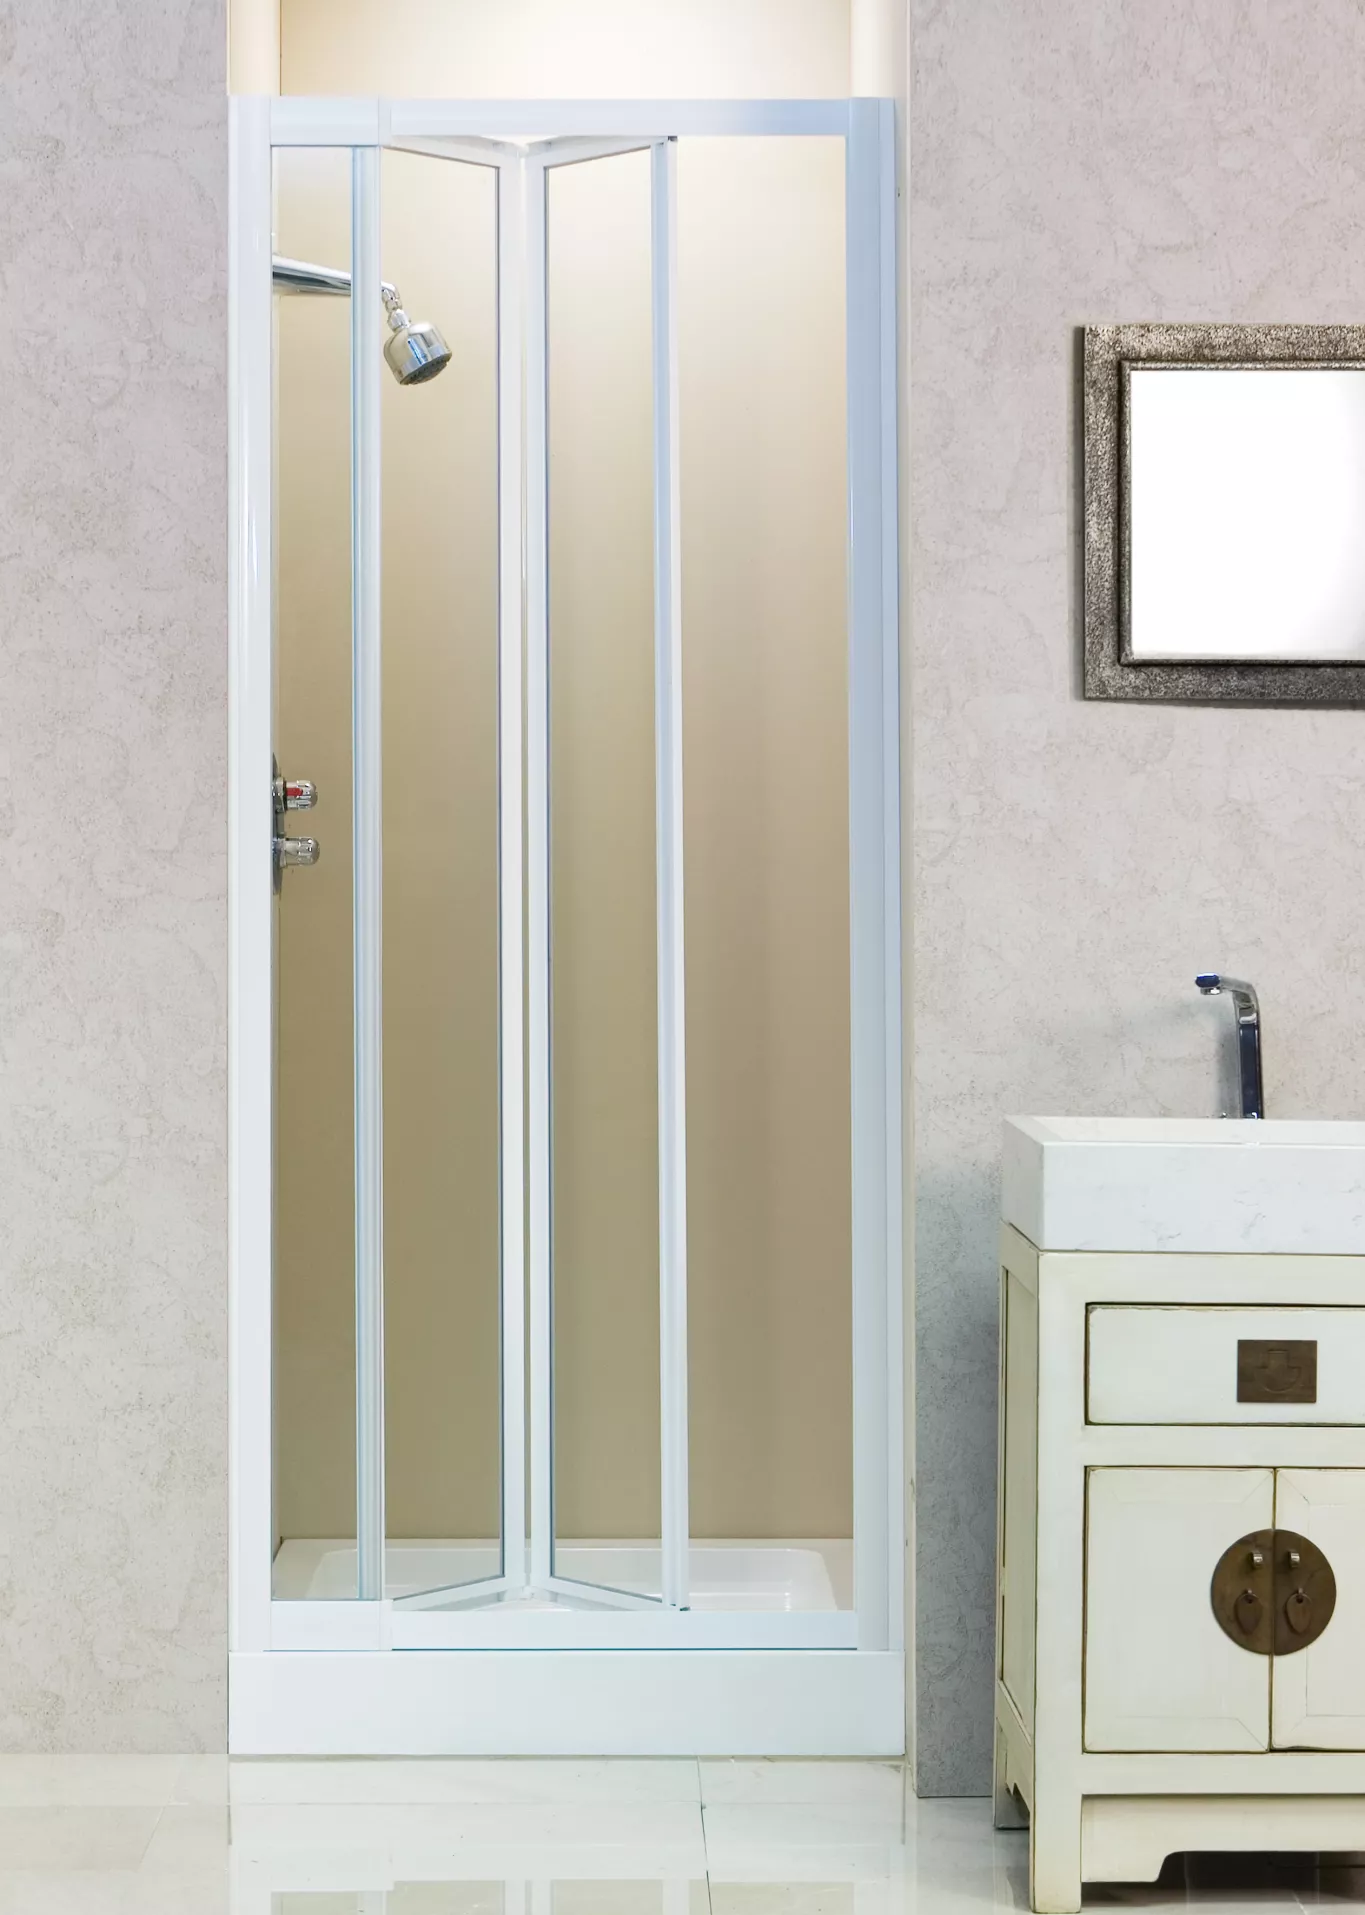 The Europa Range of Shower Doors from the 1990s